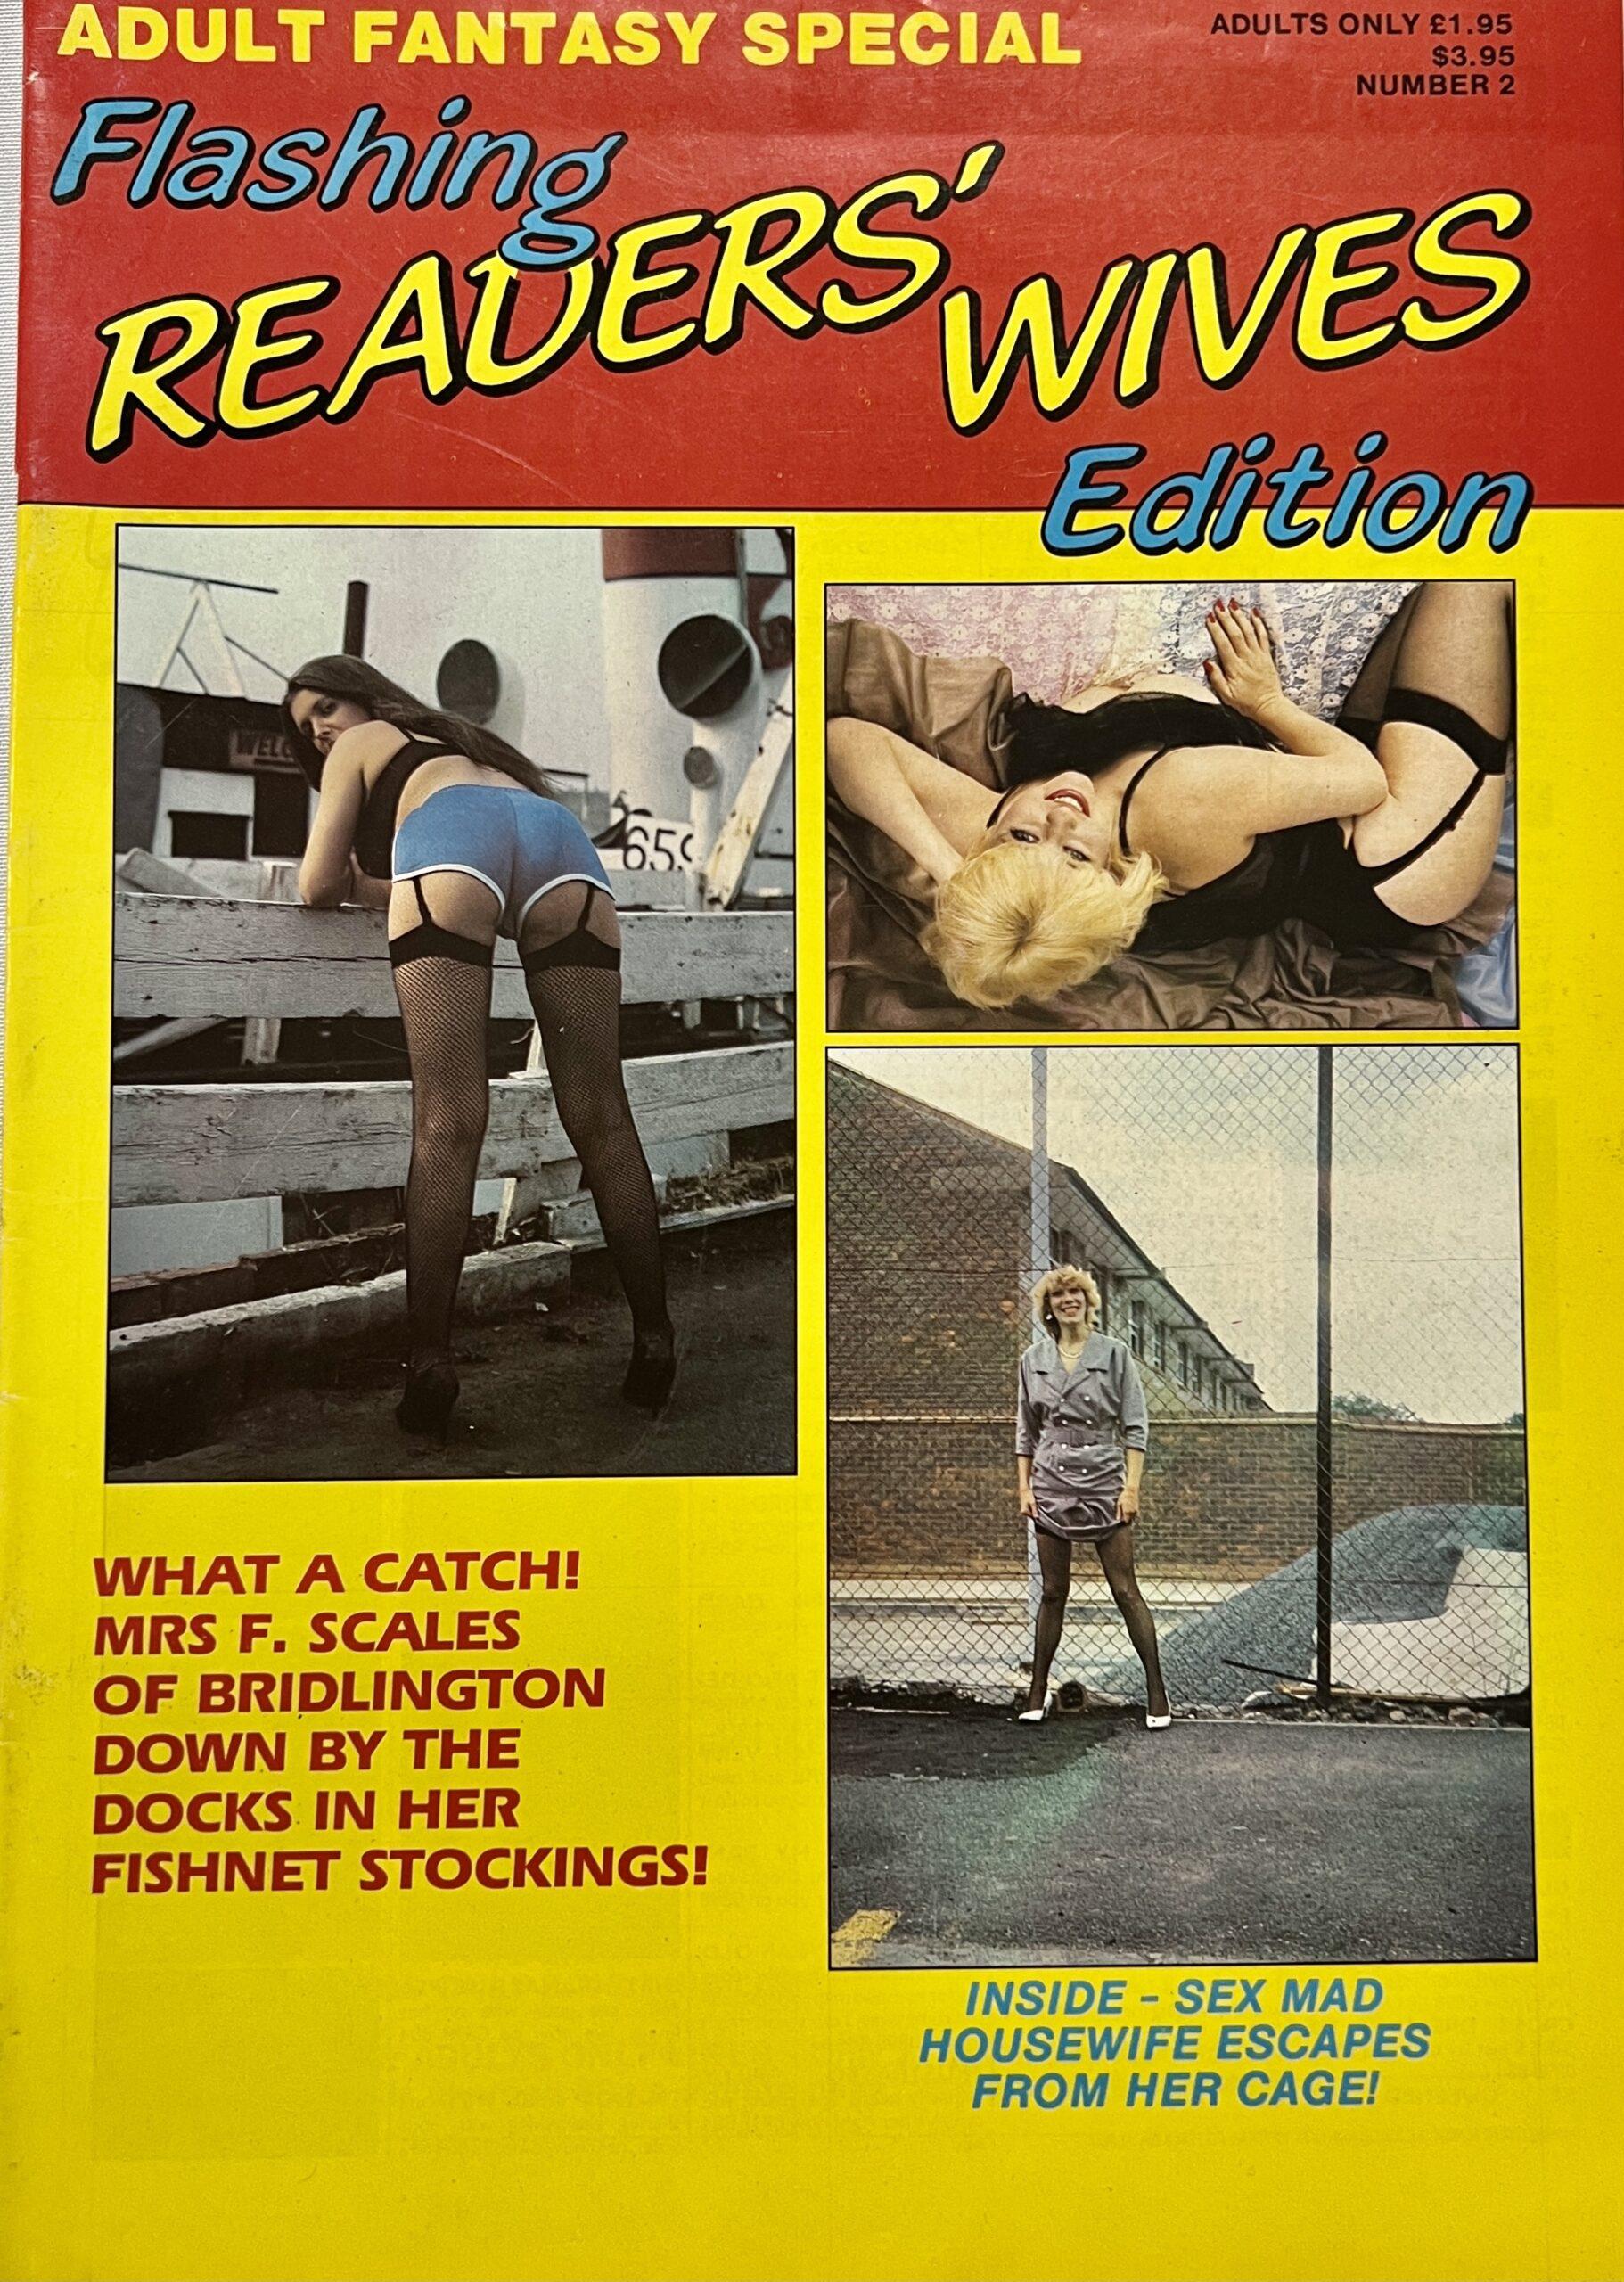 Flashing Readers Wives Edition Adult Fantasy Special #2 80S UK Magazine picture picture pic